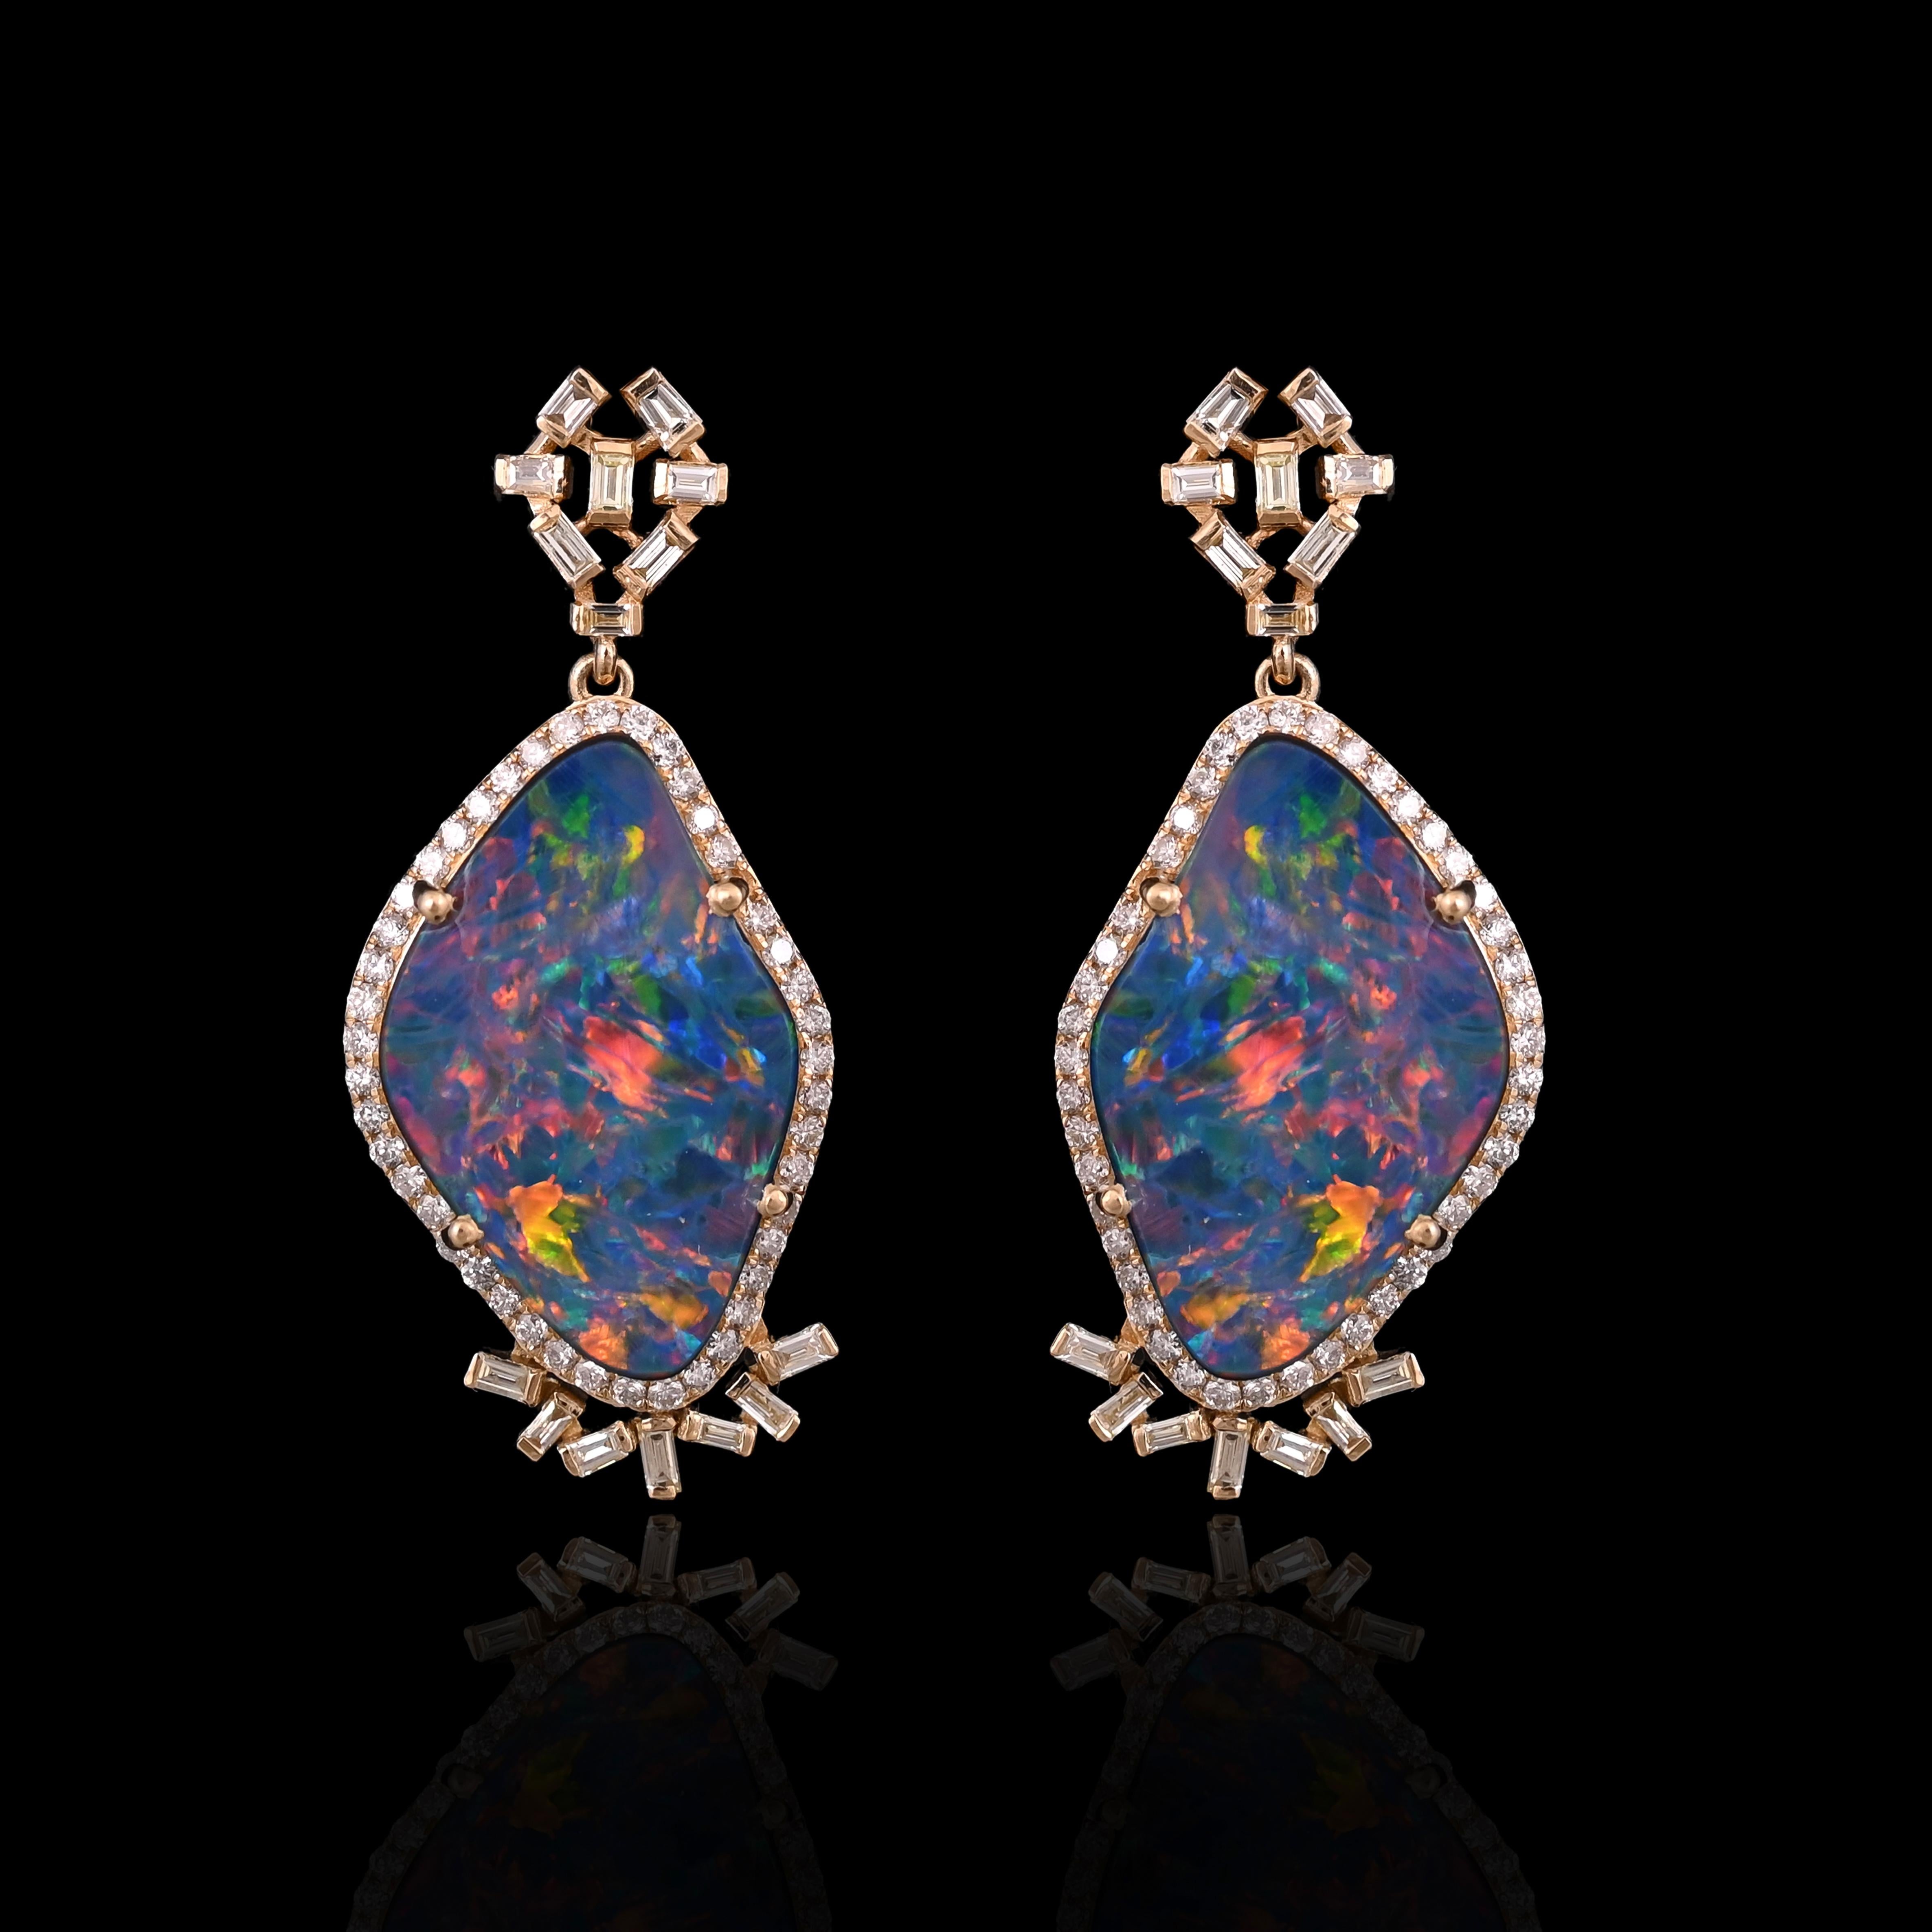 A very gorgeous and stunning, Doublet Opal Chandelier Earrings set in 18K Yellow Gold & Diamonds. The weight of the Doublet Opal us 10.64 carats. The Opals are Doublet Australian Opal and has an Orange & Yellow play of colour. The combined weight of